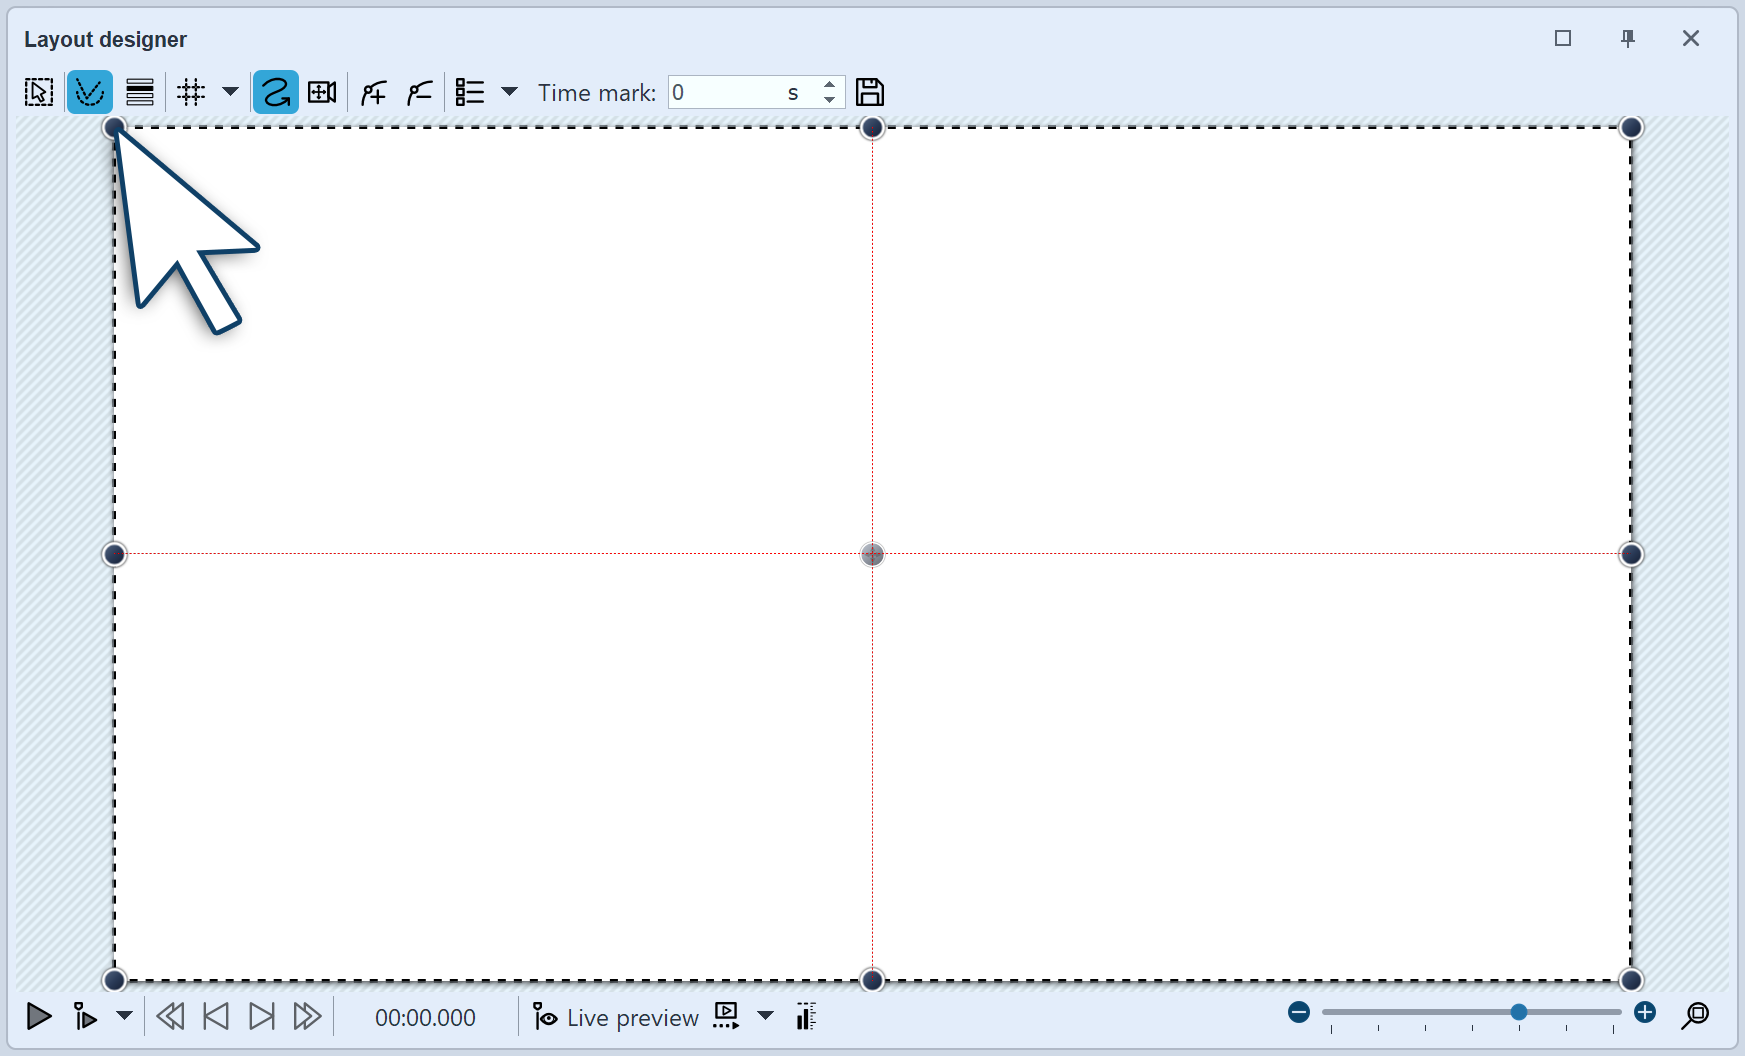 Rectangle in Layout designer